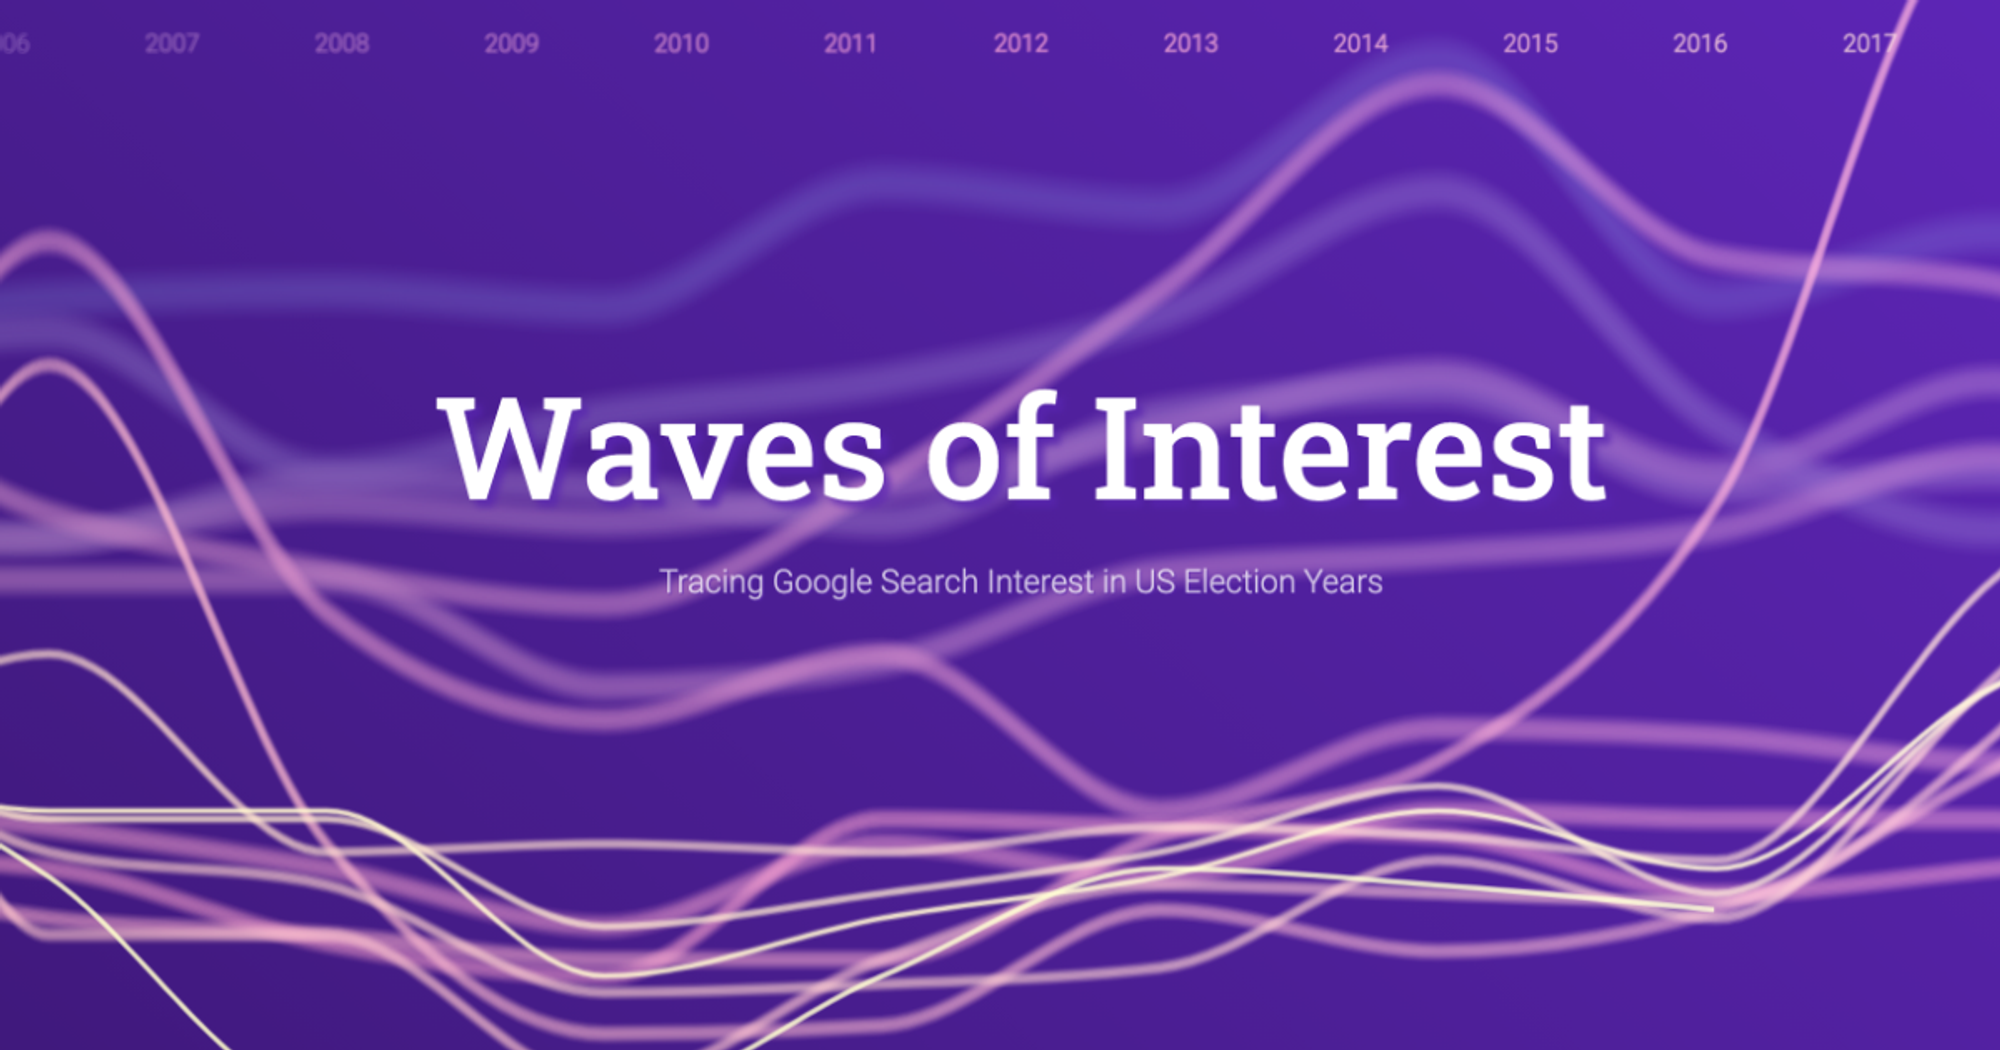 Waves of Interest - Tracing Google Search Interest in US Election Years